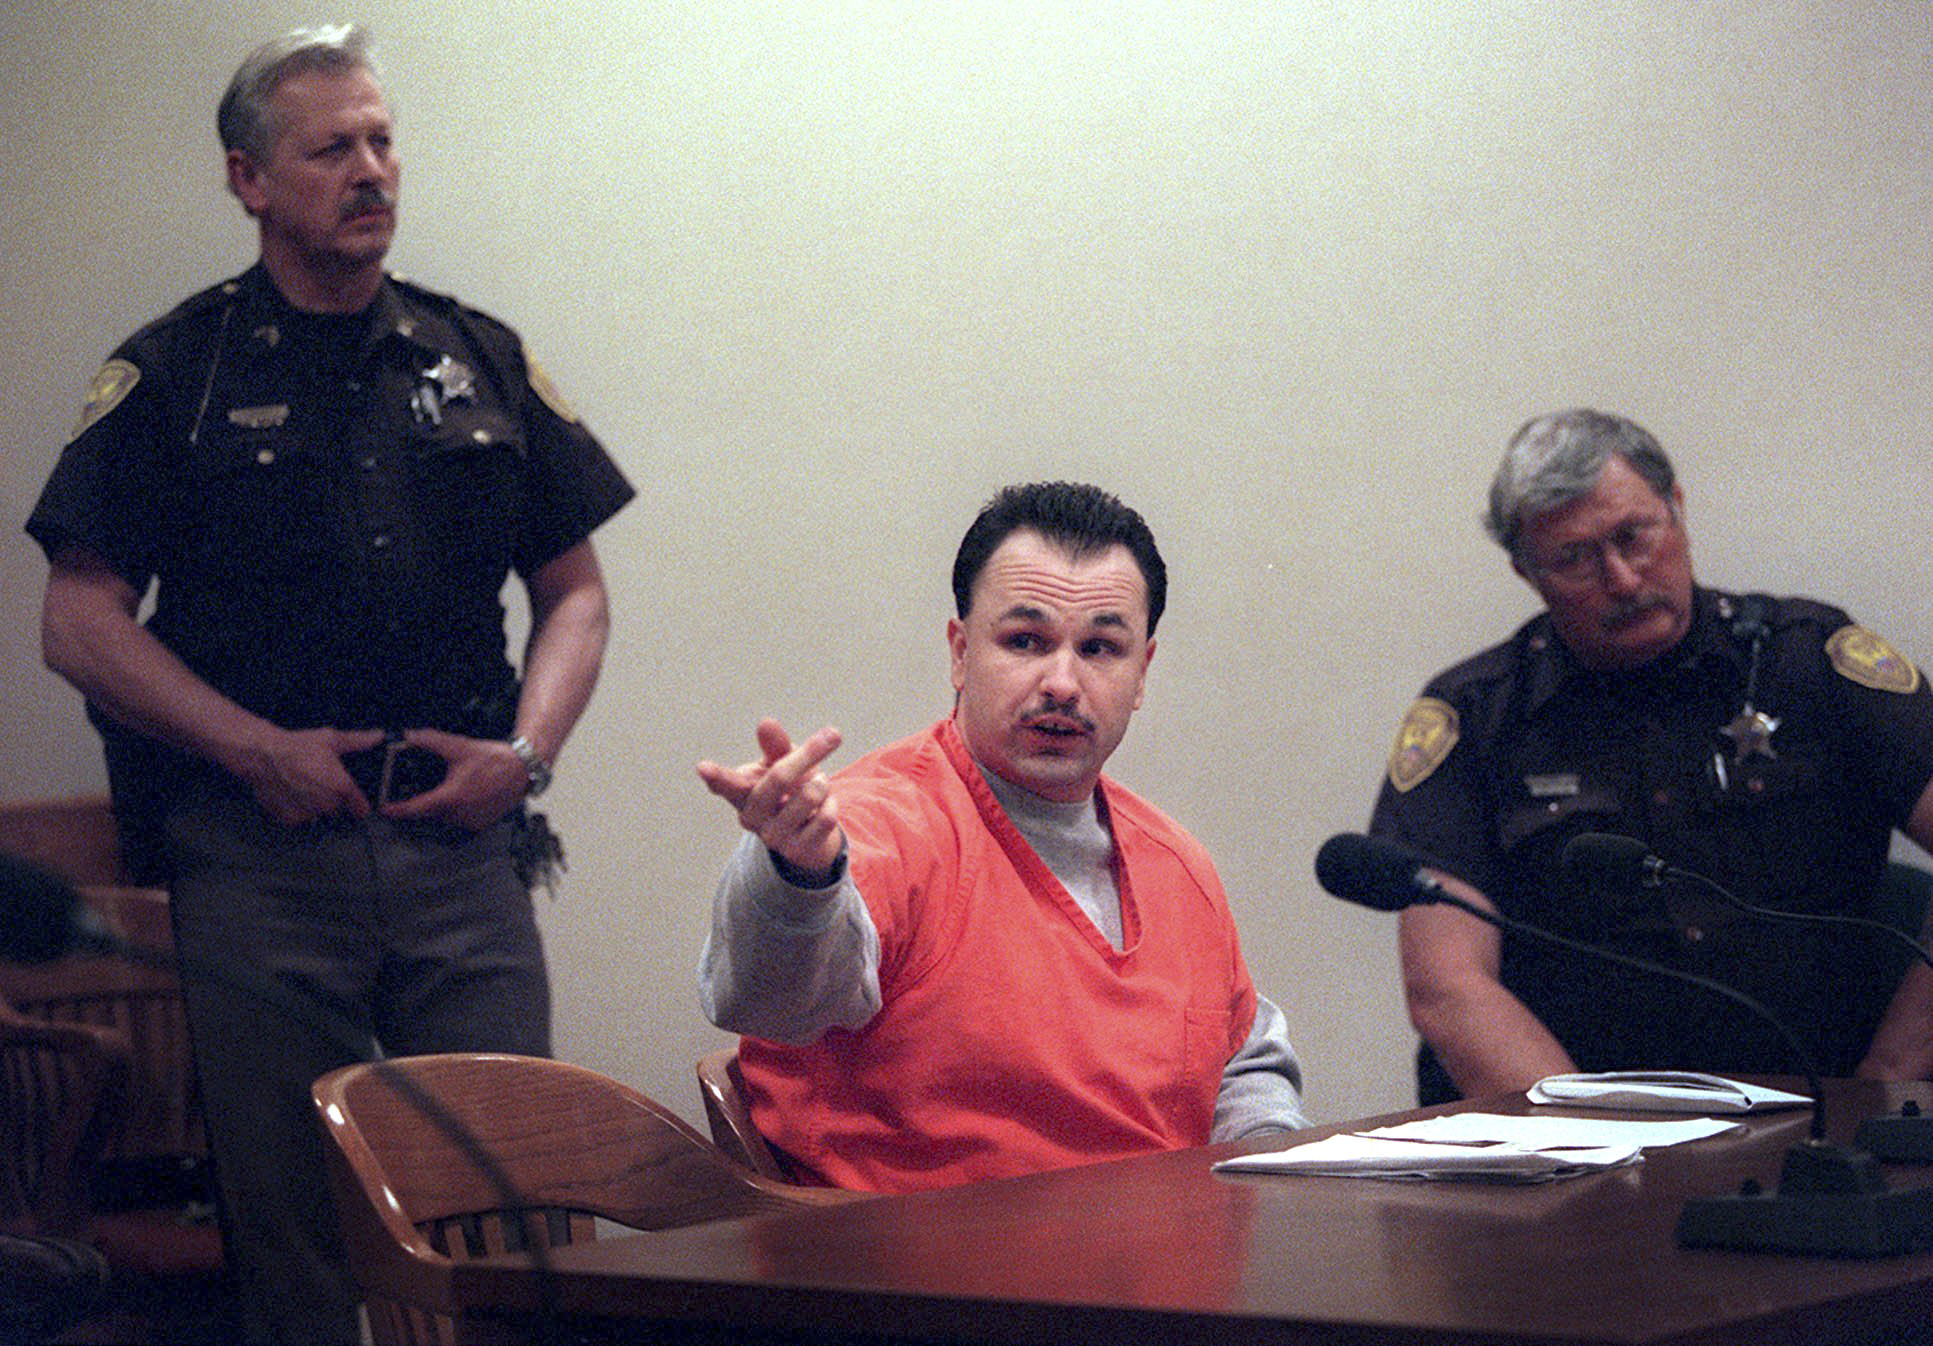 Two decades after high-profile murder trial, questions remain in the prosecution of Ken Hudson